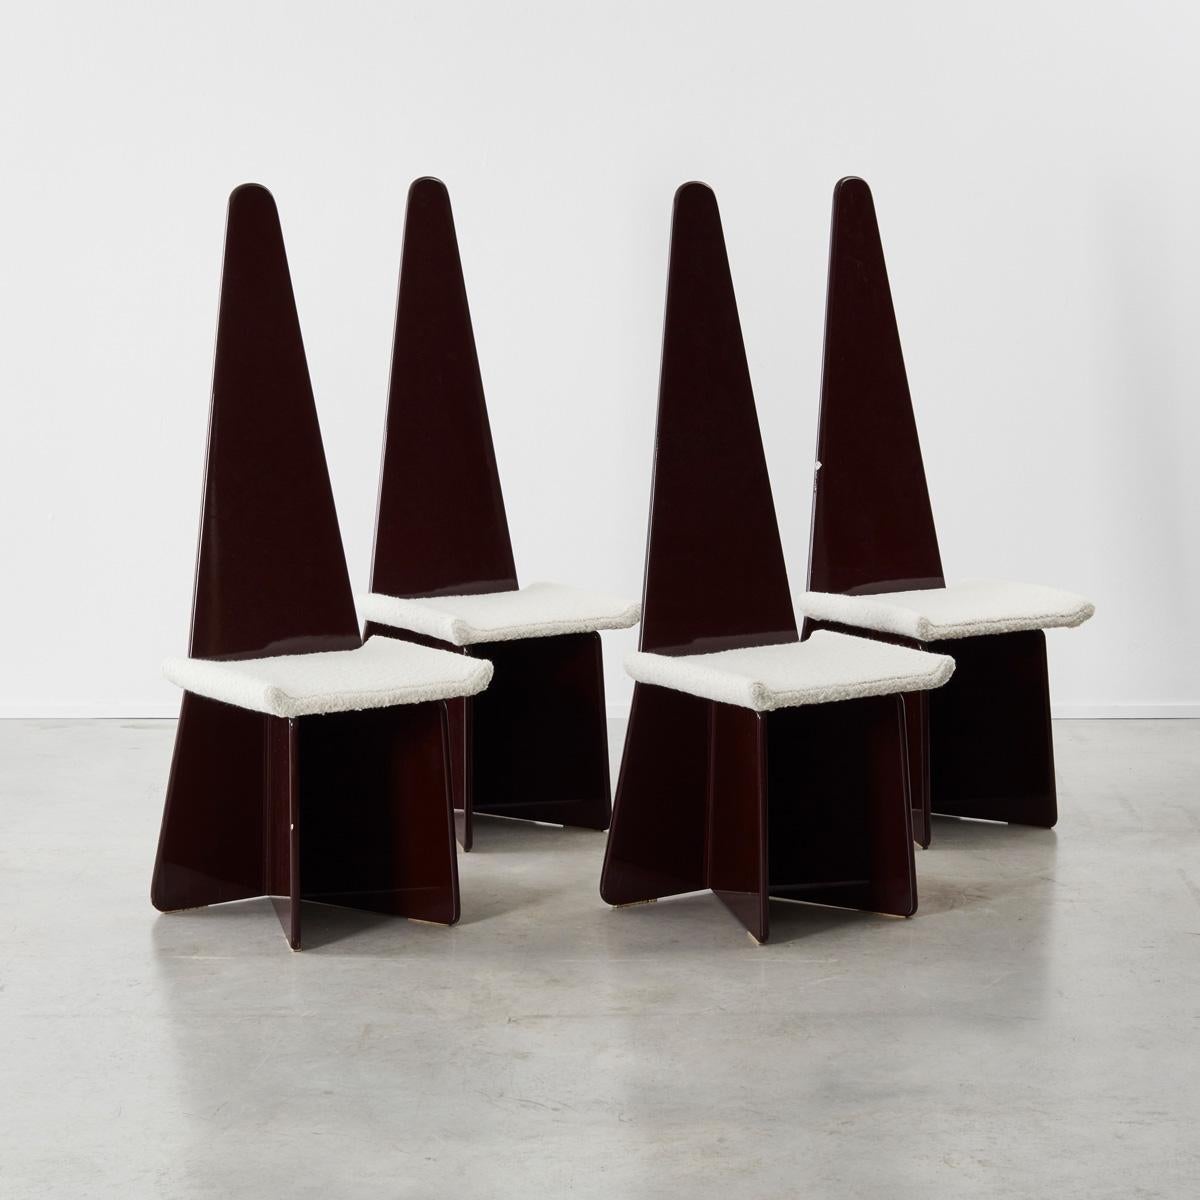 A striking set of chairs with a sculptural presence, designed for the renown Italian furniture house Sormani. Claudio Salocchi (1934–2012) worked as an architect and furniture designer, known for detailed research into furniture layouts. As a